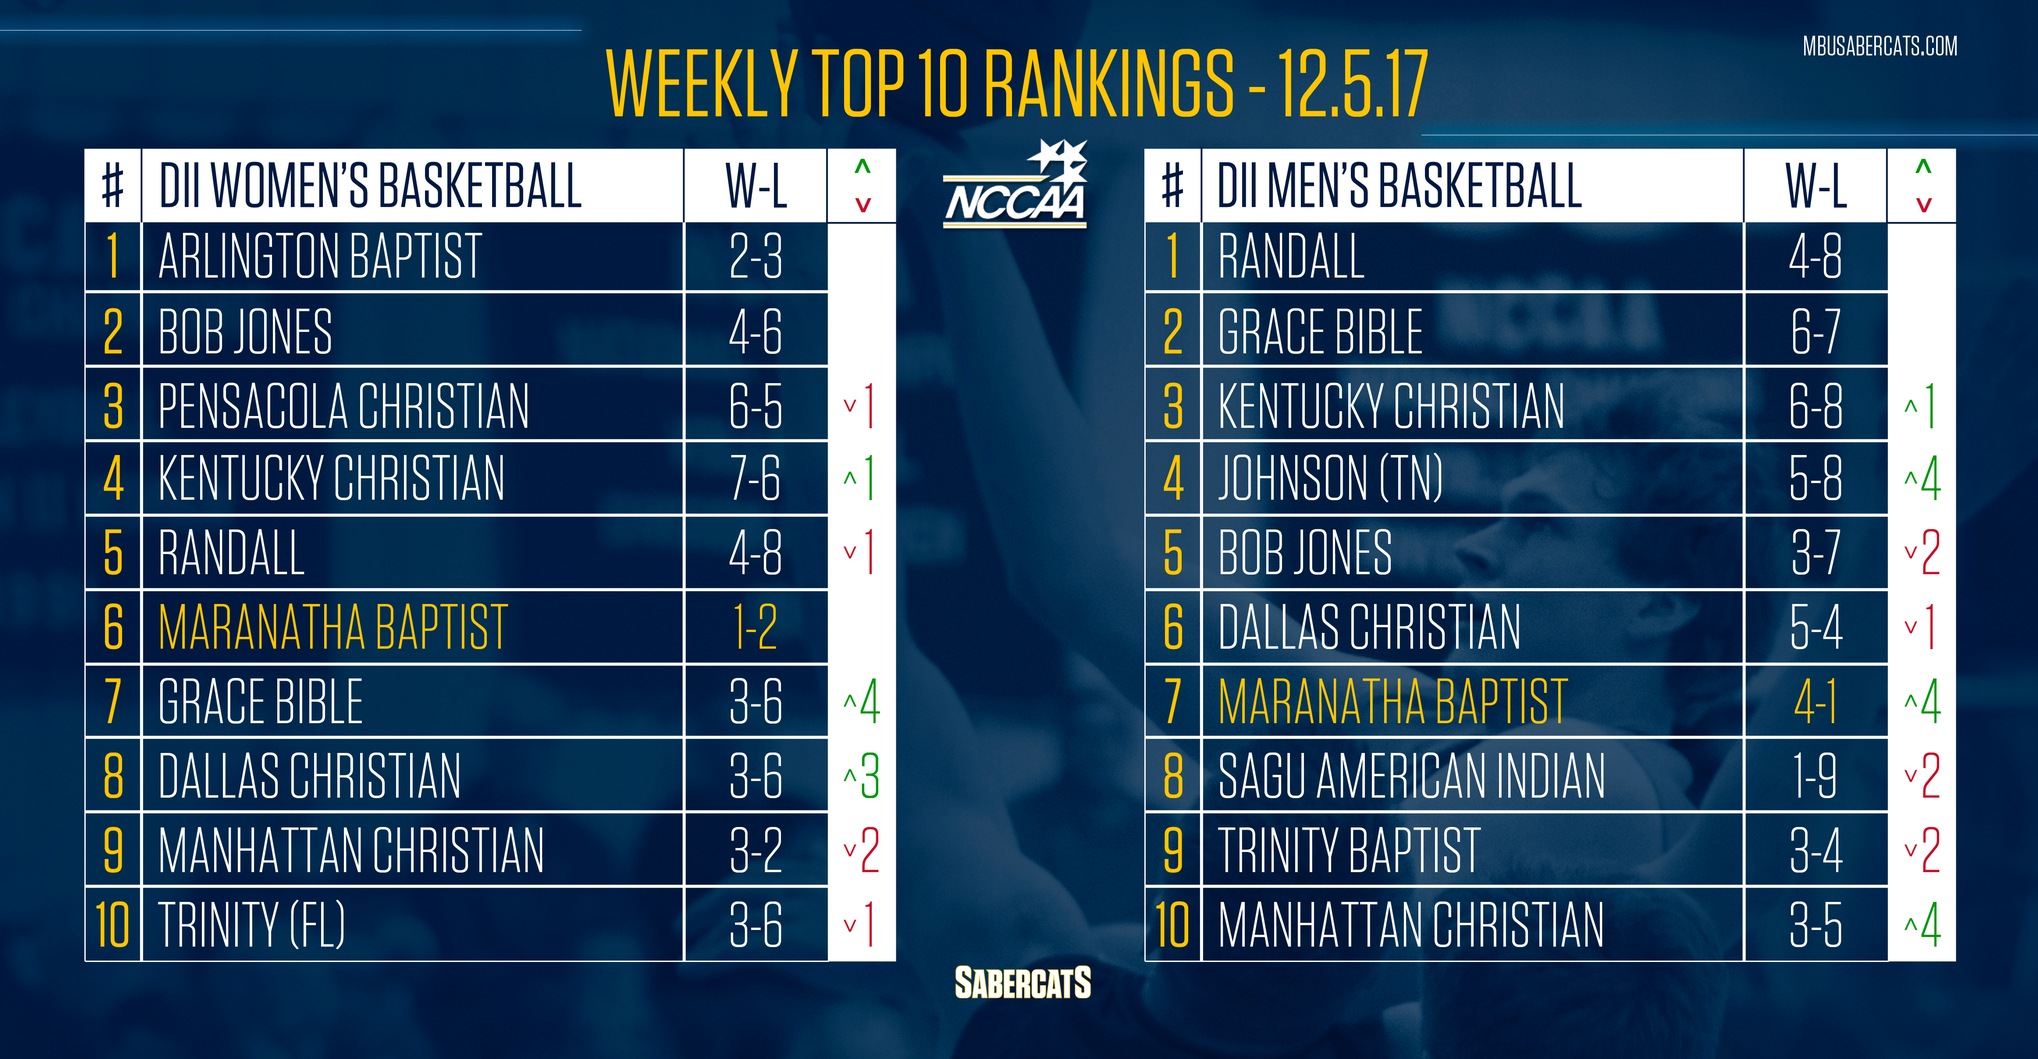 NCCAA Rankings: Sabercats in the Top 10